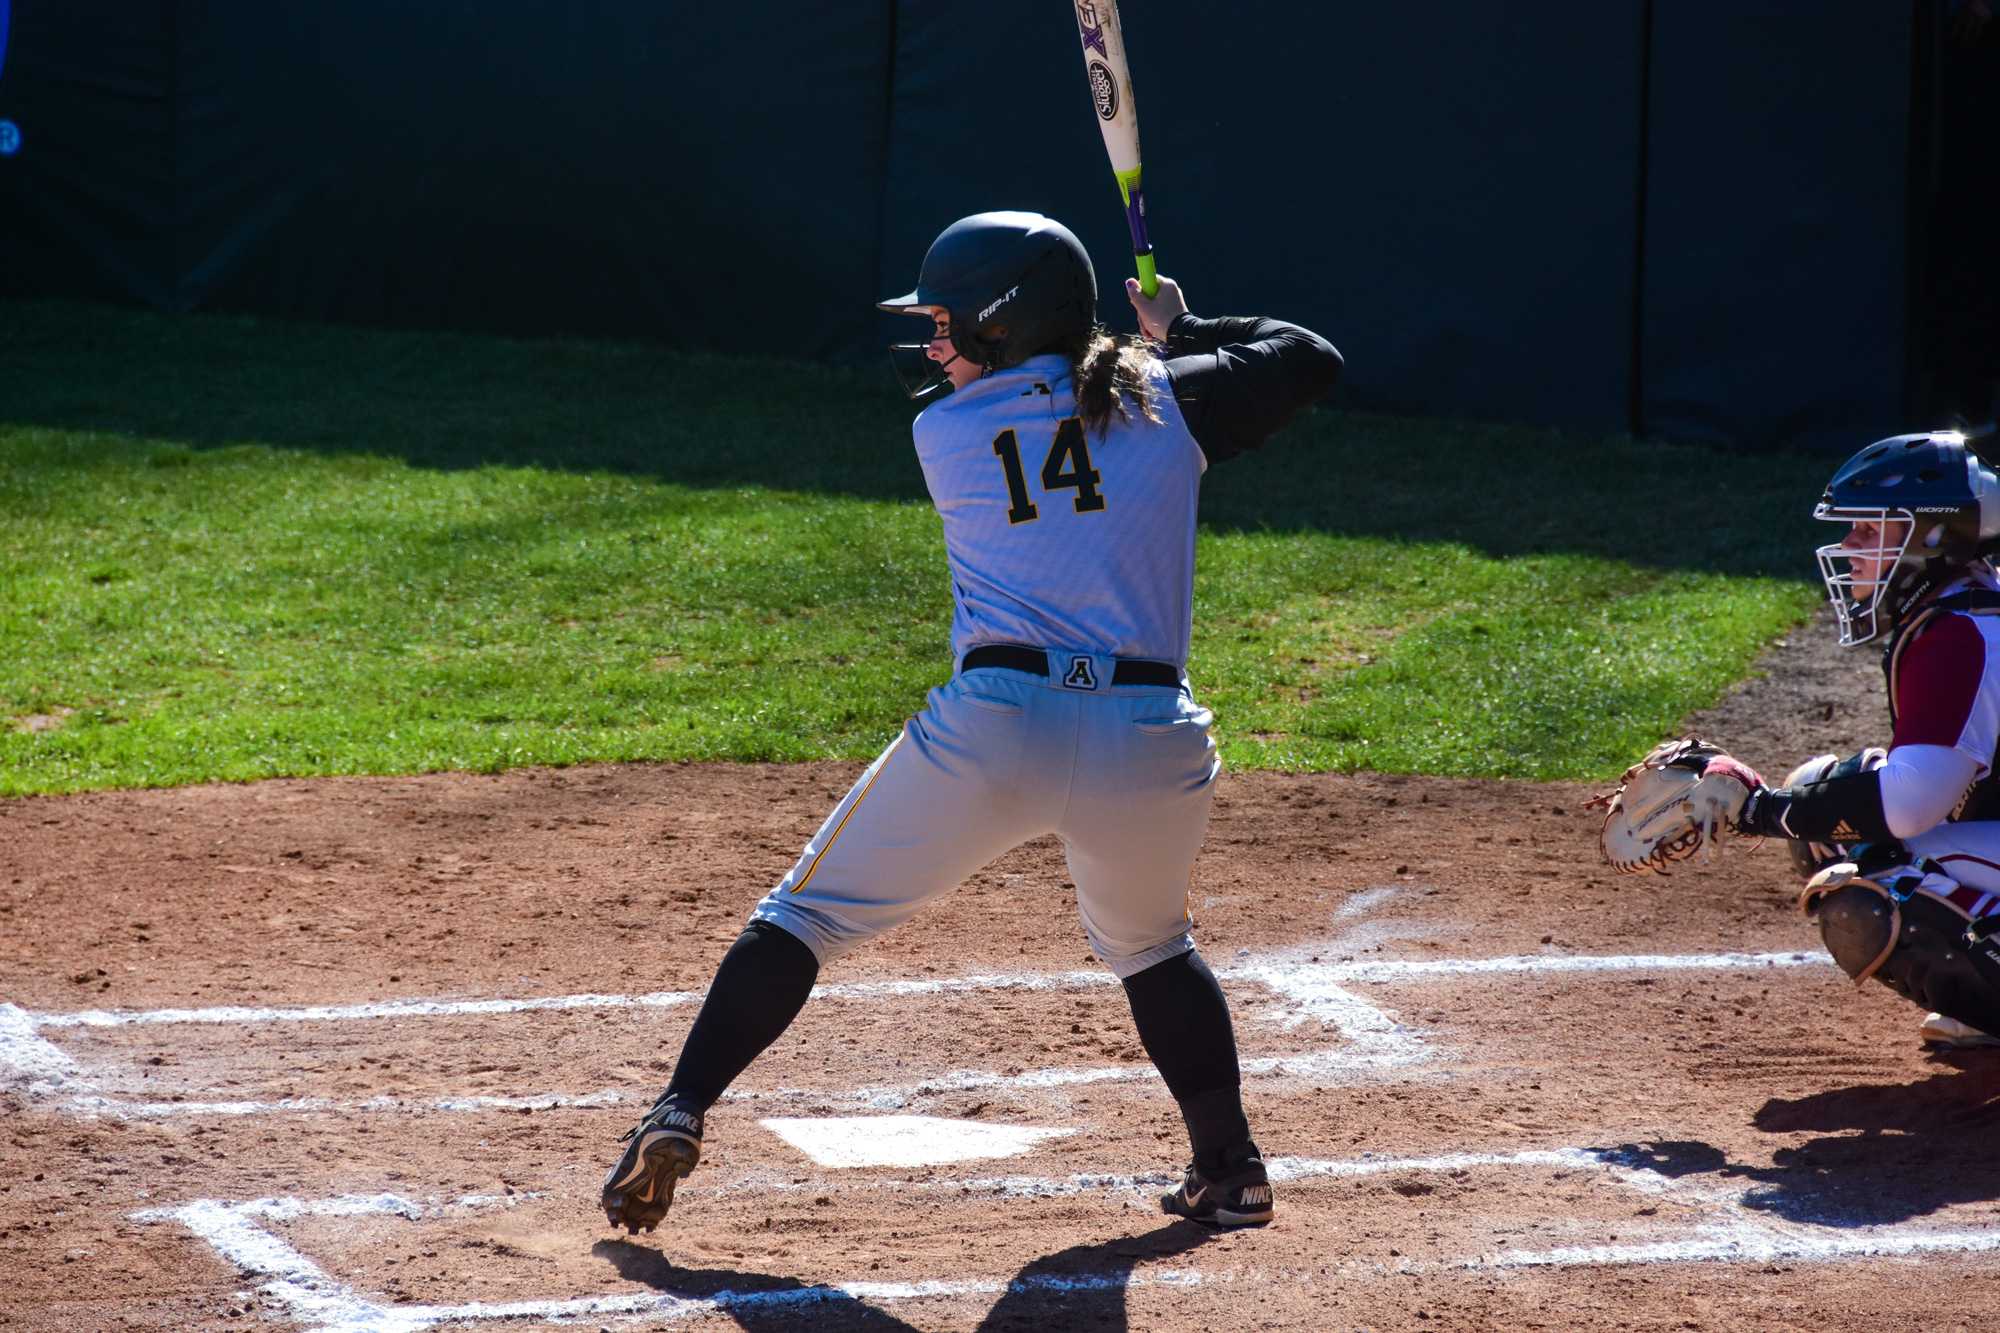 Freshman+catcher+Jenny+Dodd+bats+during+a+game+against+Troy+on+Friday%2C+March+18.+Photos+by+Lee+Sanderlin.+